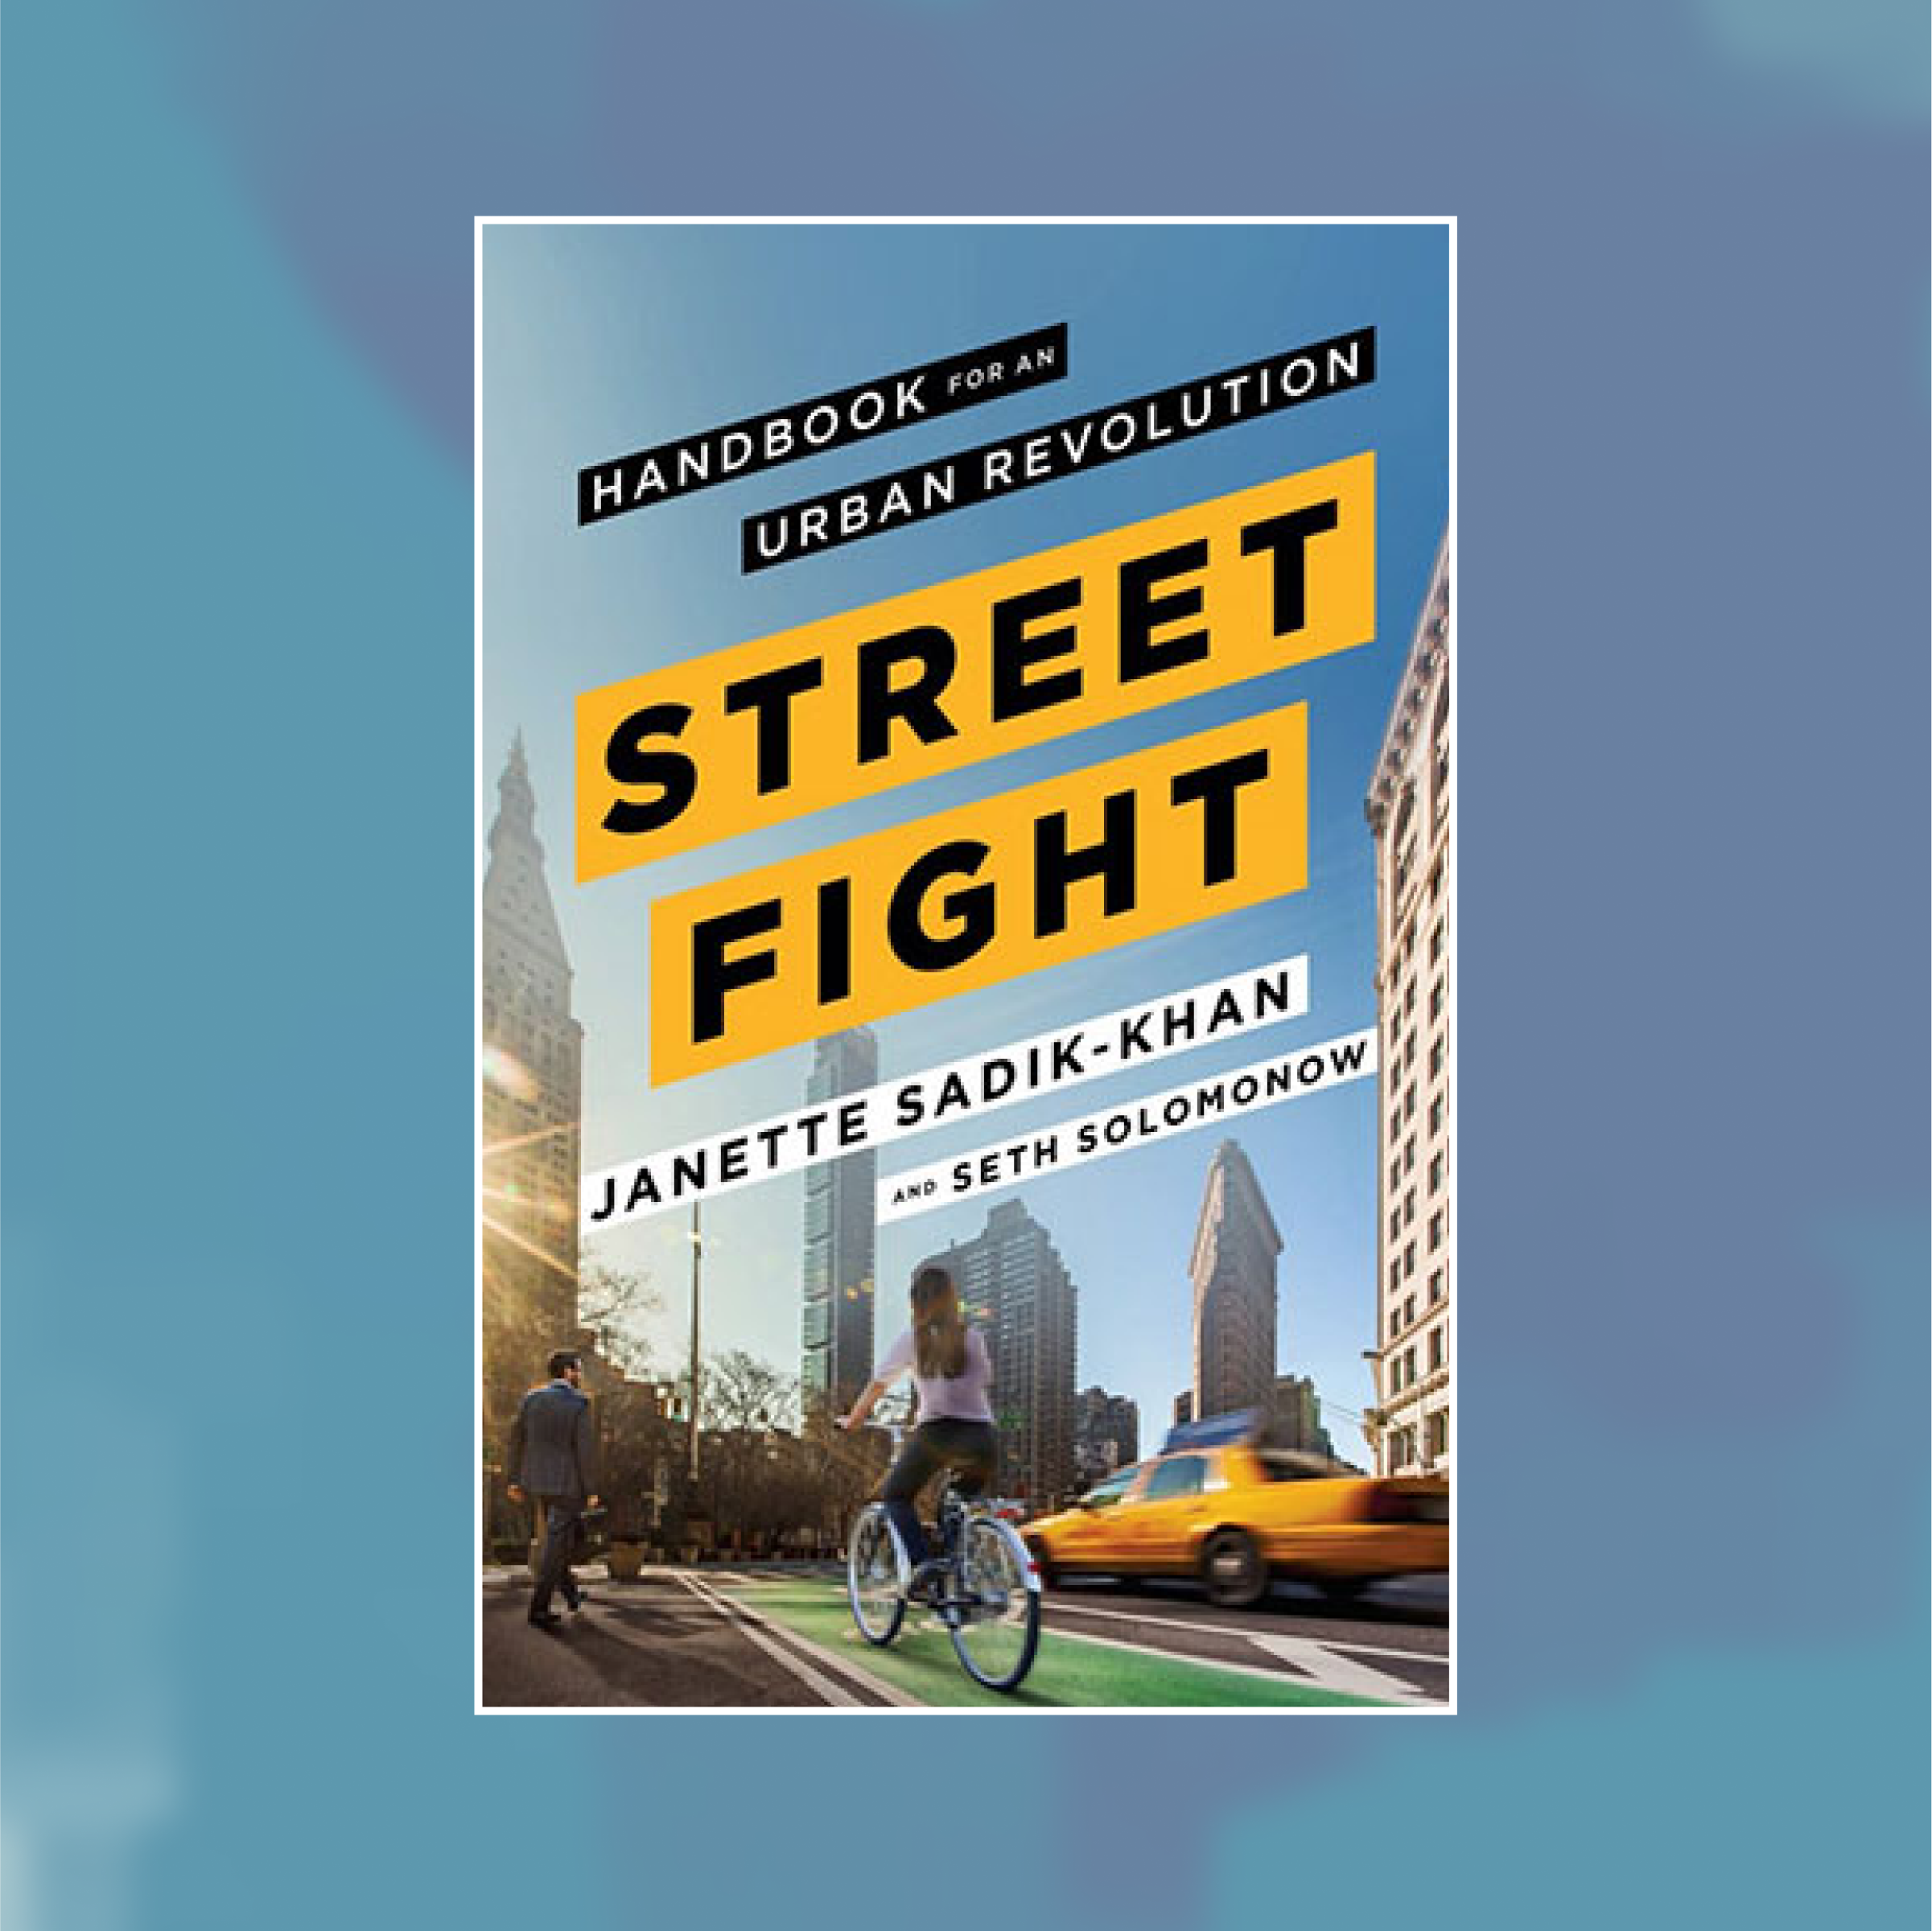 Book cover of Streetfight against a painted abstract background